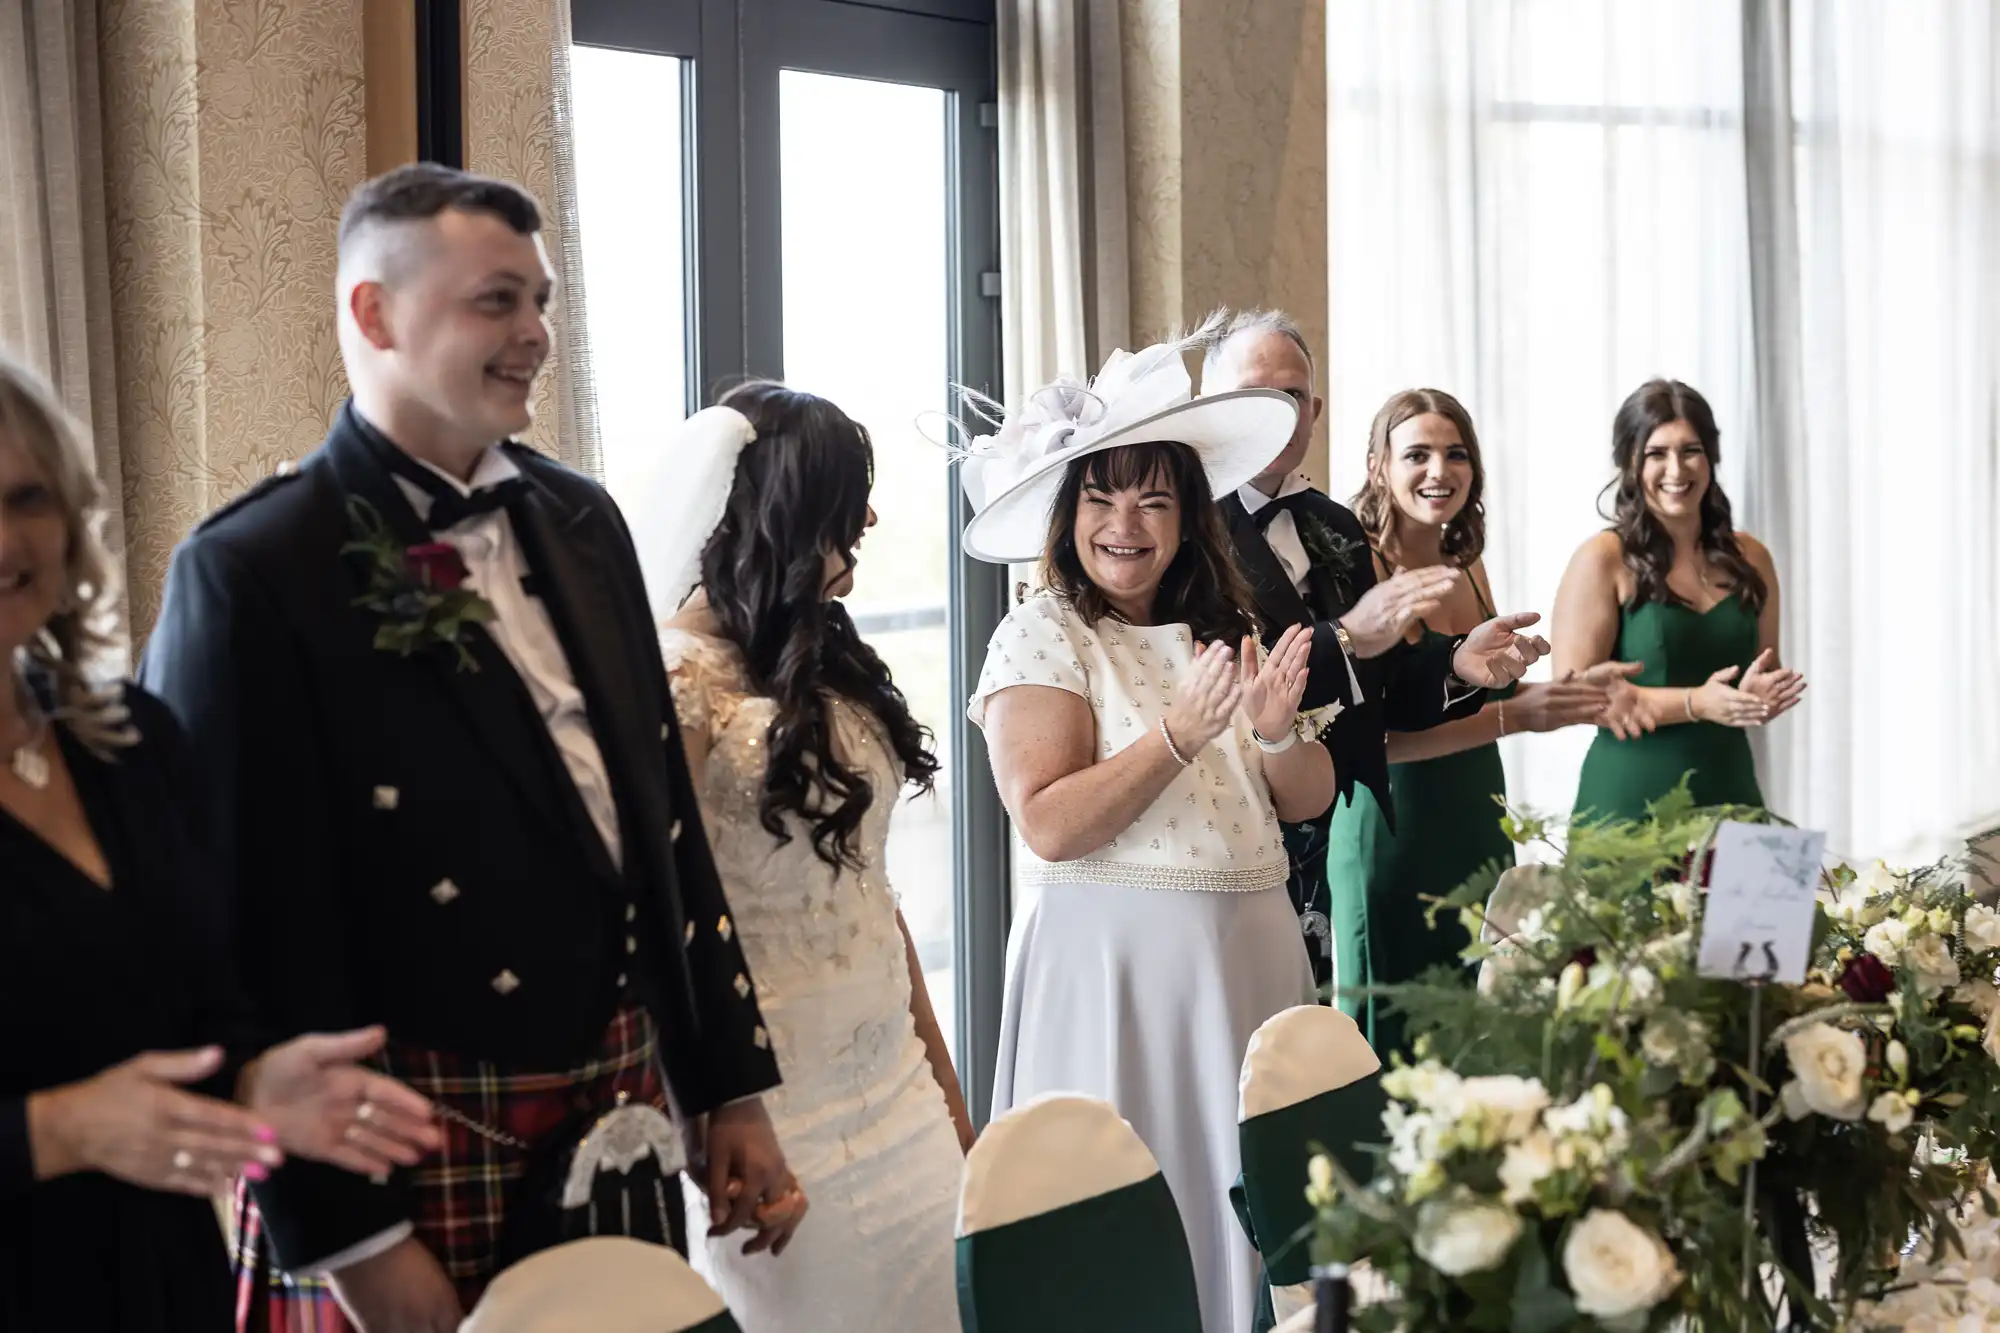 Wedding guests clapping and smiling as newlyweds walk through the venue, highlighting a mixture of formal Western and Scottish attire.